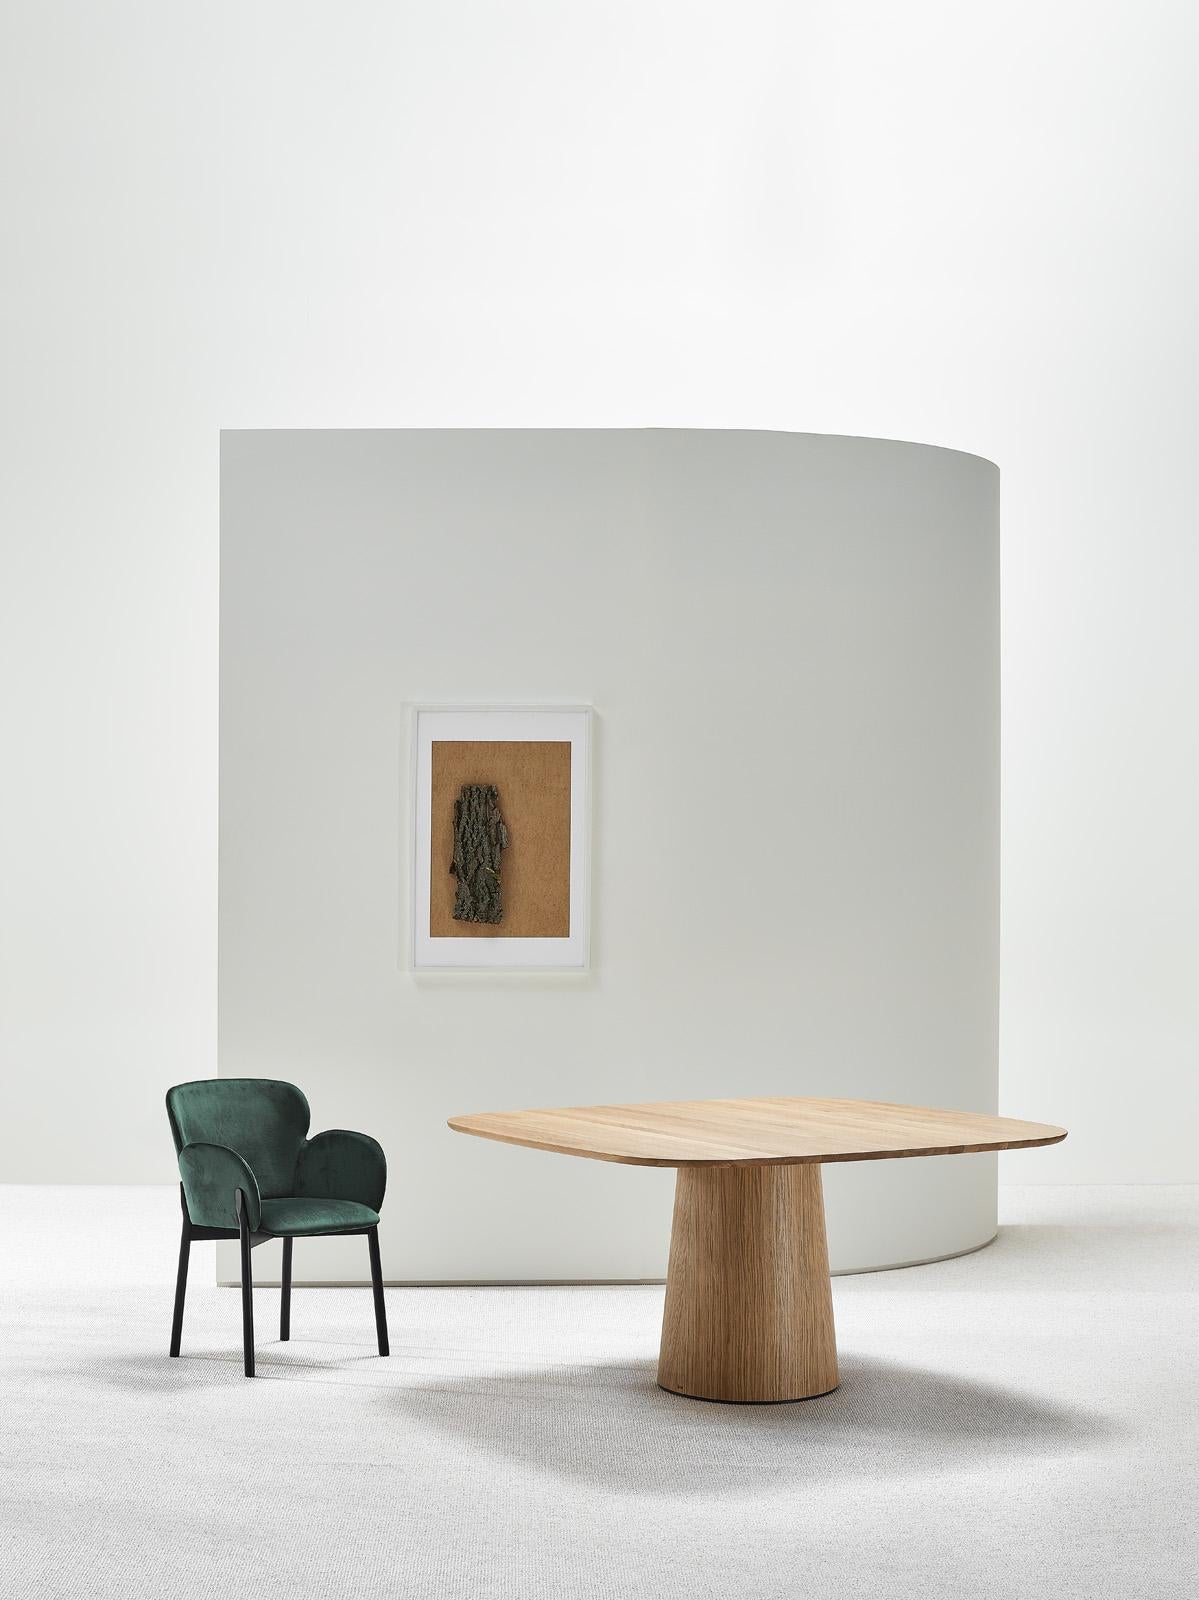 Dining Table POV 462 signed by TON & Kashkash studio

Top shape:
Round, square, or rounded square

Top size:
120cm, 130cm,140cm, or 150cm

Wood types:
Solid oak or American walnut


--
The P.O.V. collection features a modular design and an